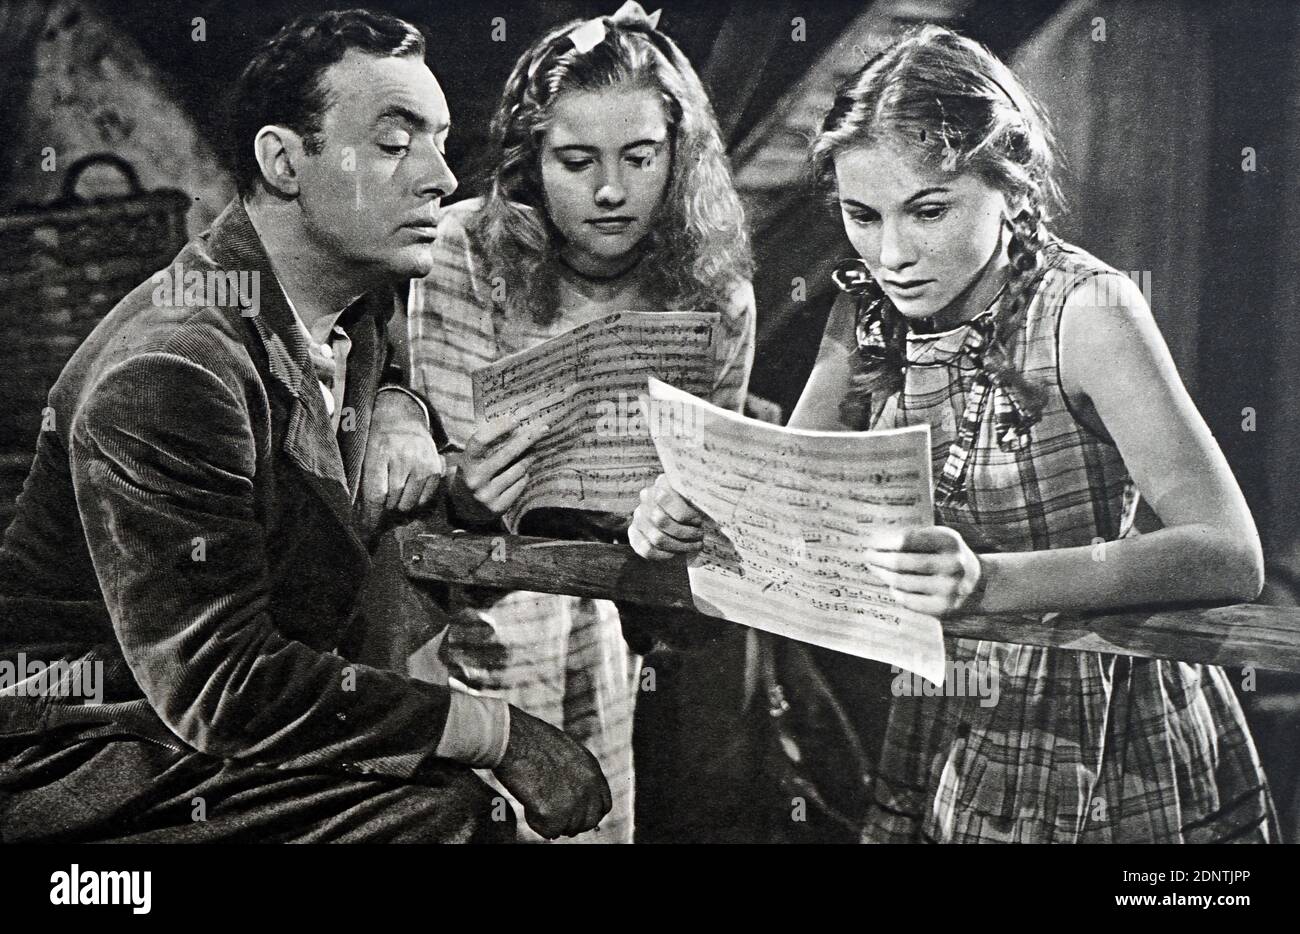 Film still from 'The Constant Nymph' starring Joan Fontaine, Charles Boyer, Alexis Smith, and Peter Lore. Stock Photo